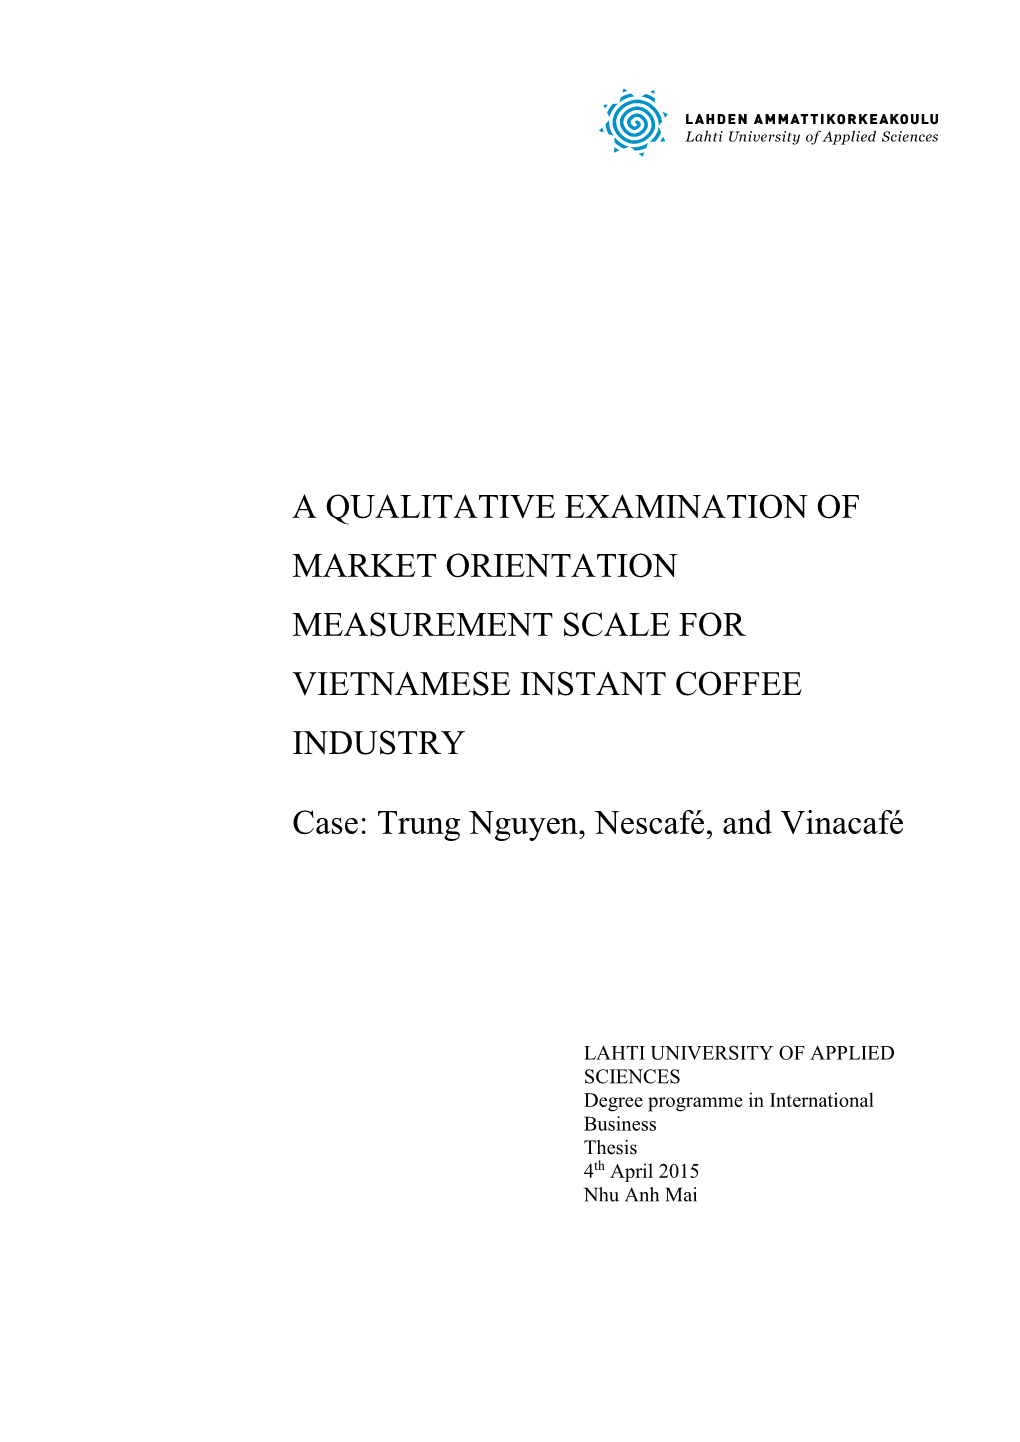 A Qualitative Examination of Market Orientation Measurement Scale for Vietnamese Instant Coffee Industry